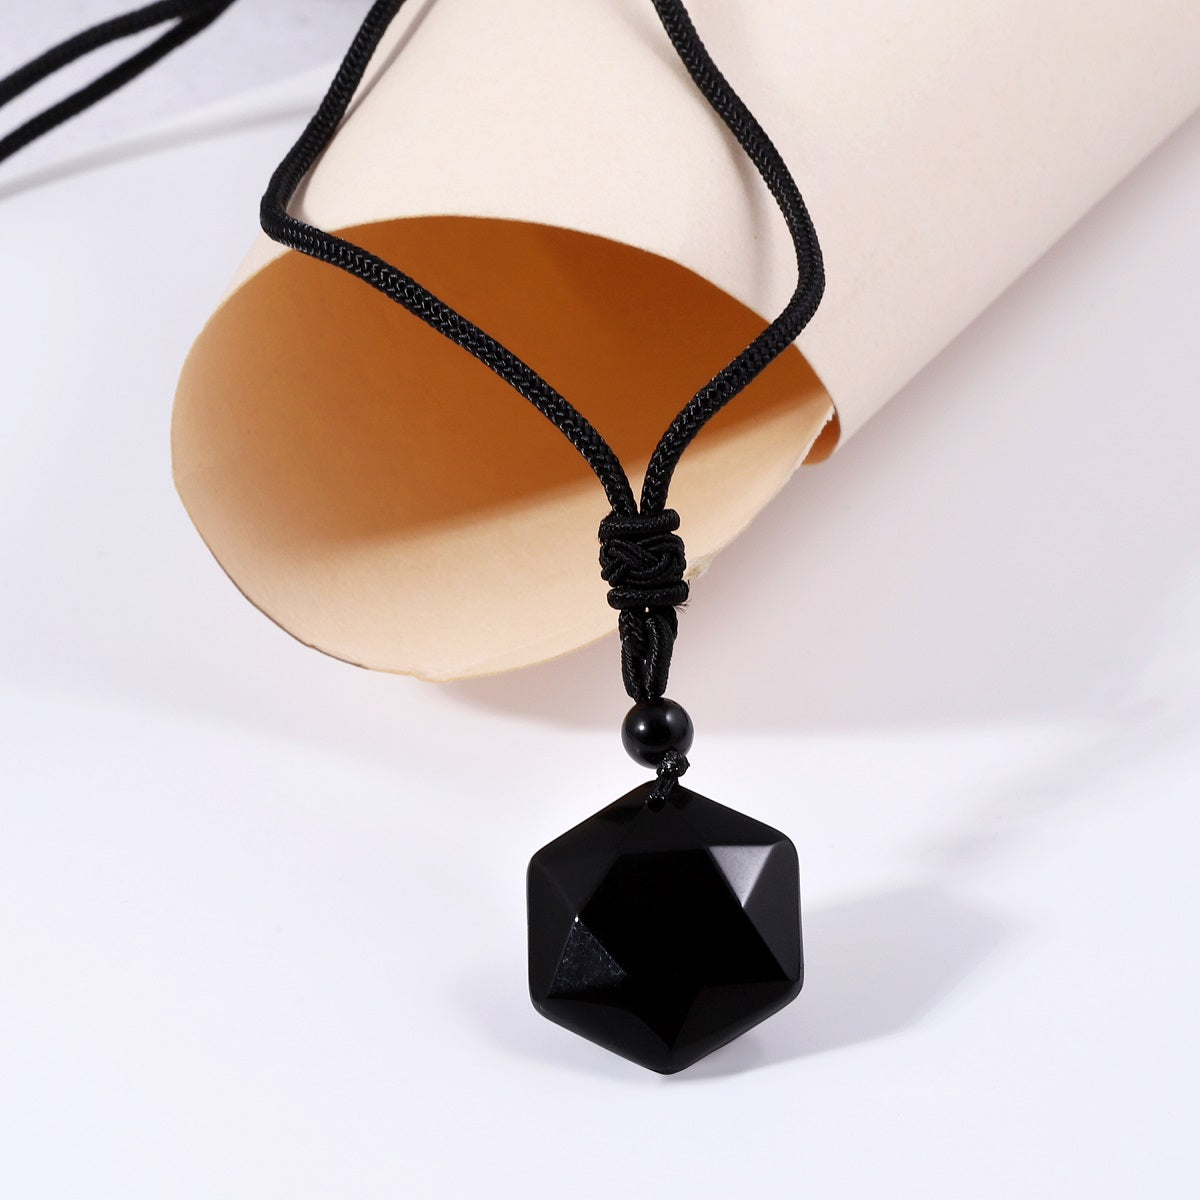 A detailed view of the artistic and intricate wrapping design that surrounds the black onyx gemstone, adding a touch of elegance to the pendant necklace.